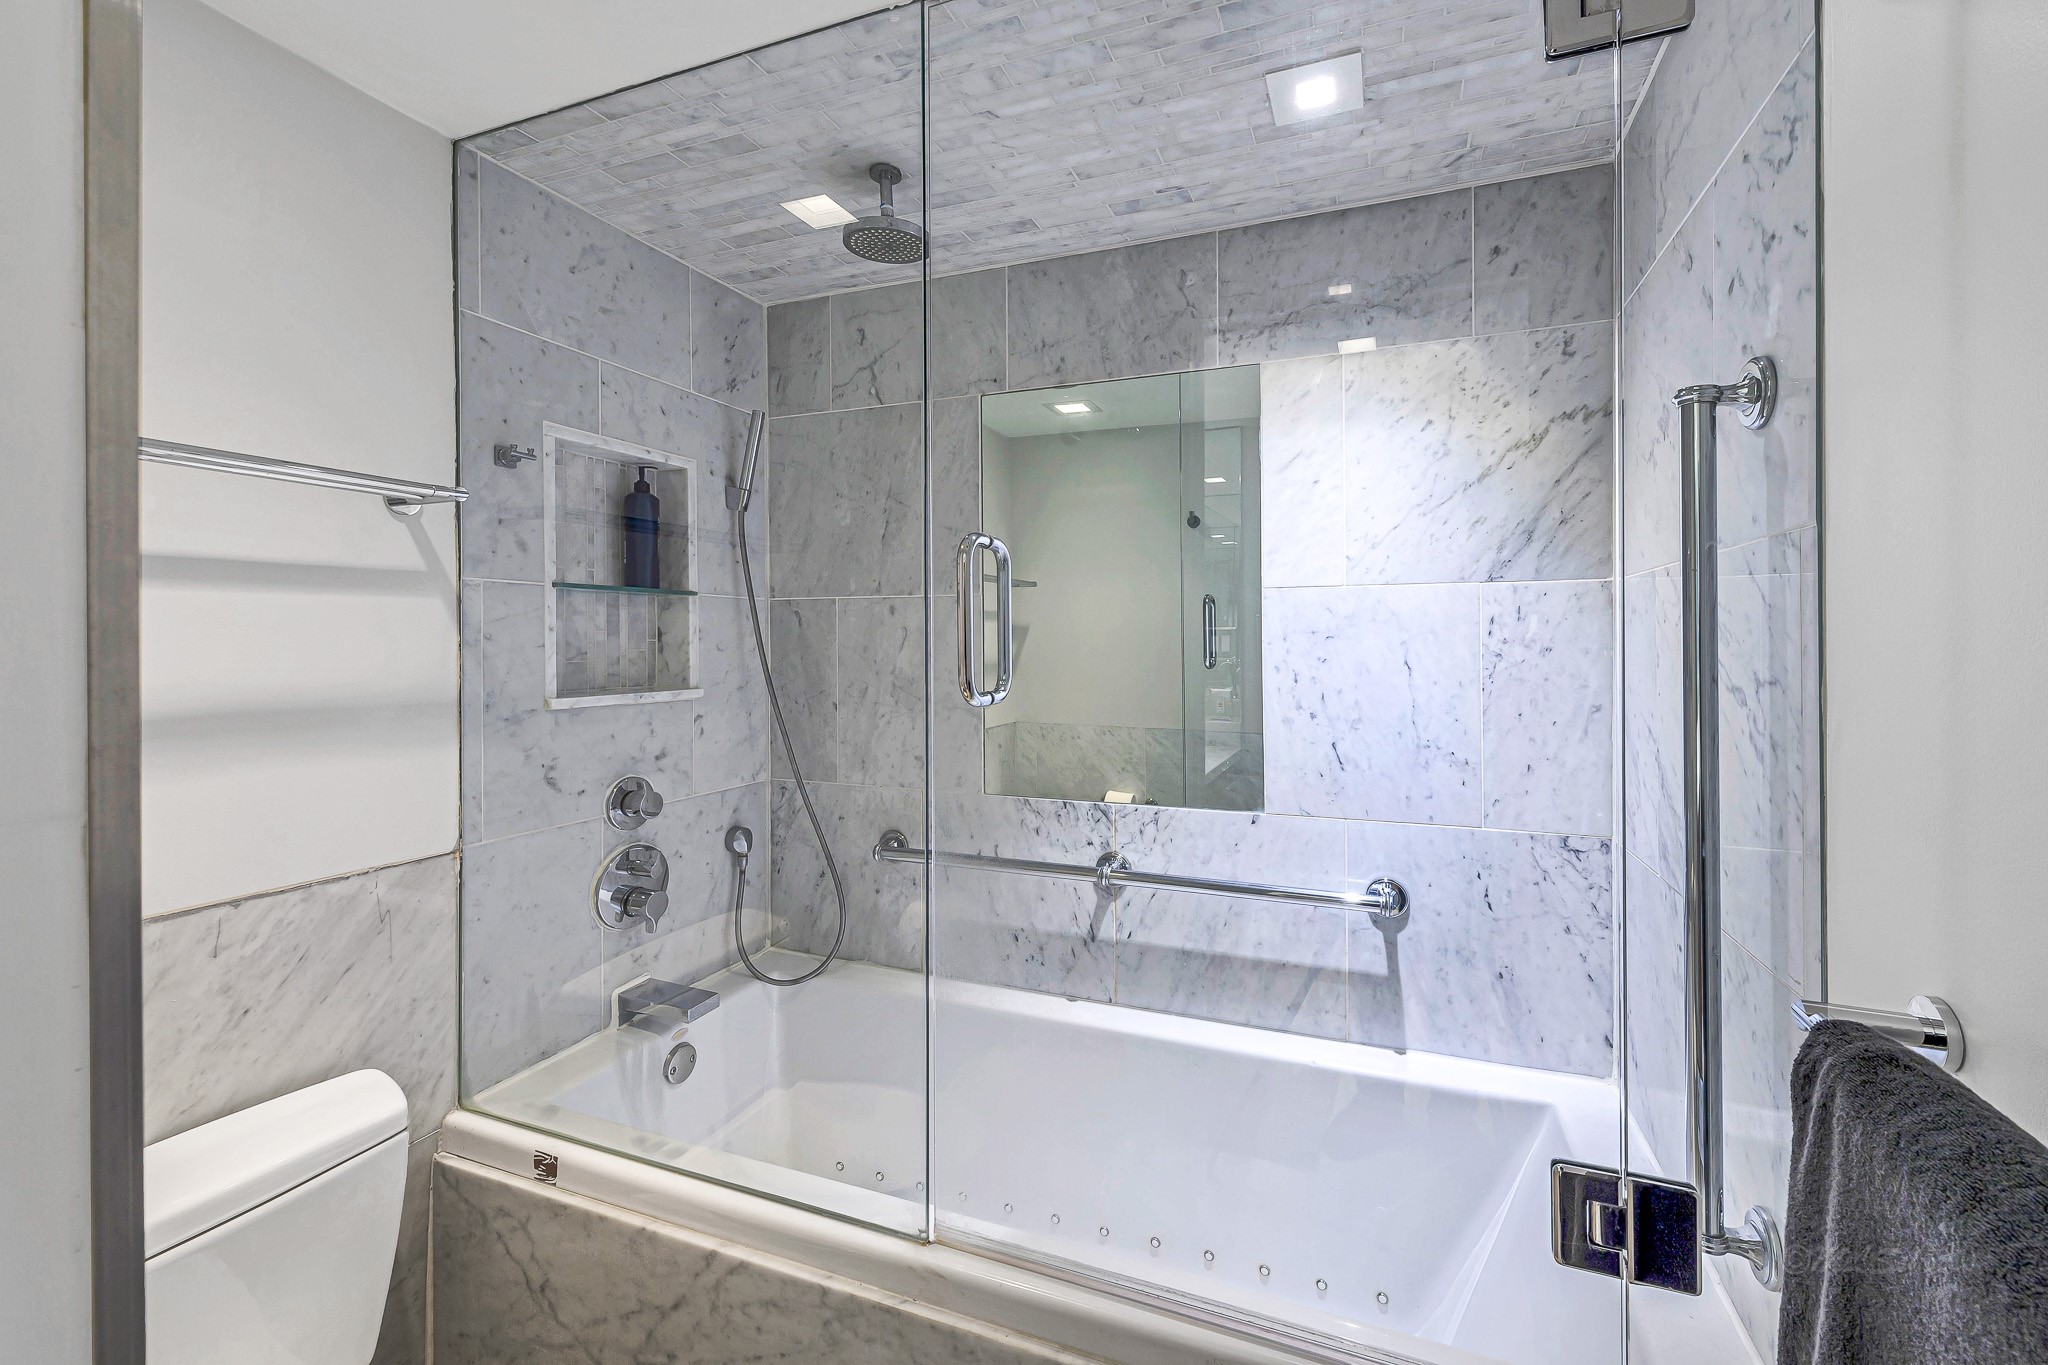 Shower/tub combo with rain shower feature and jetted tub